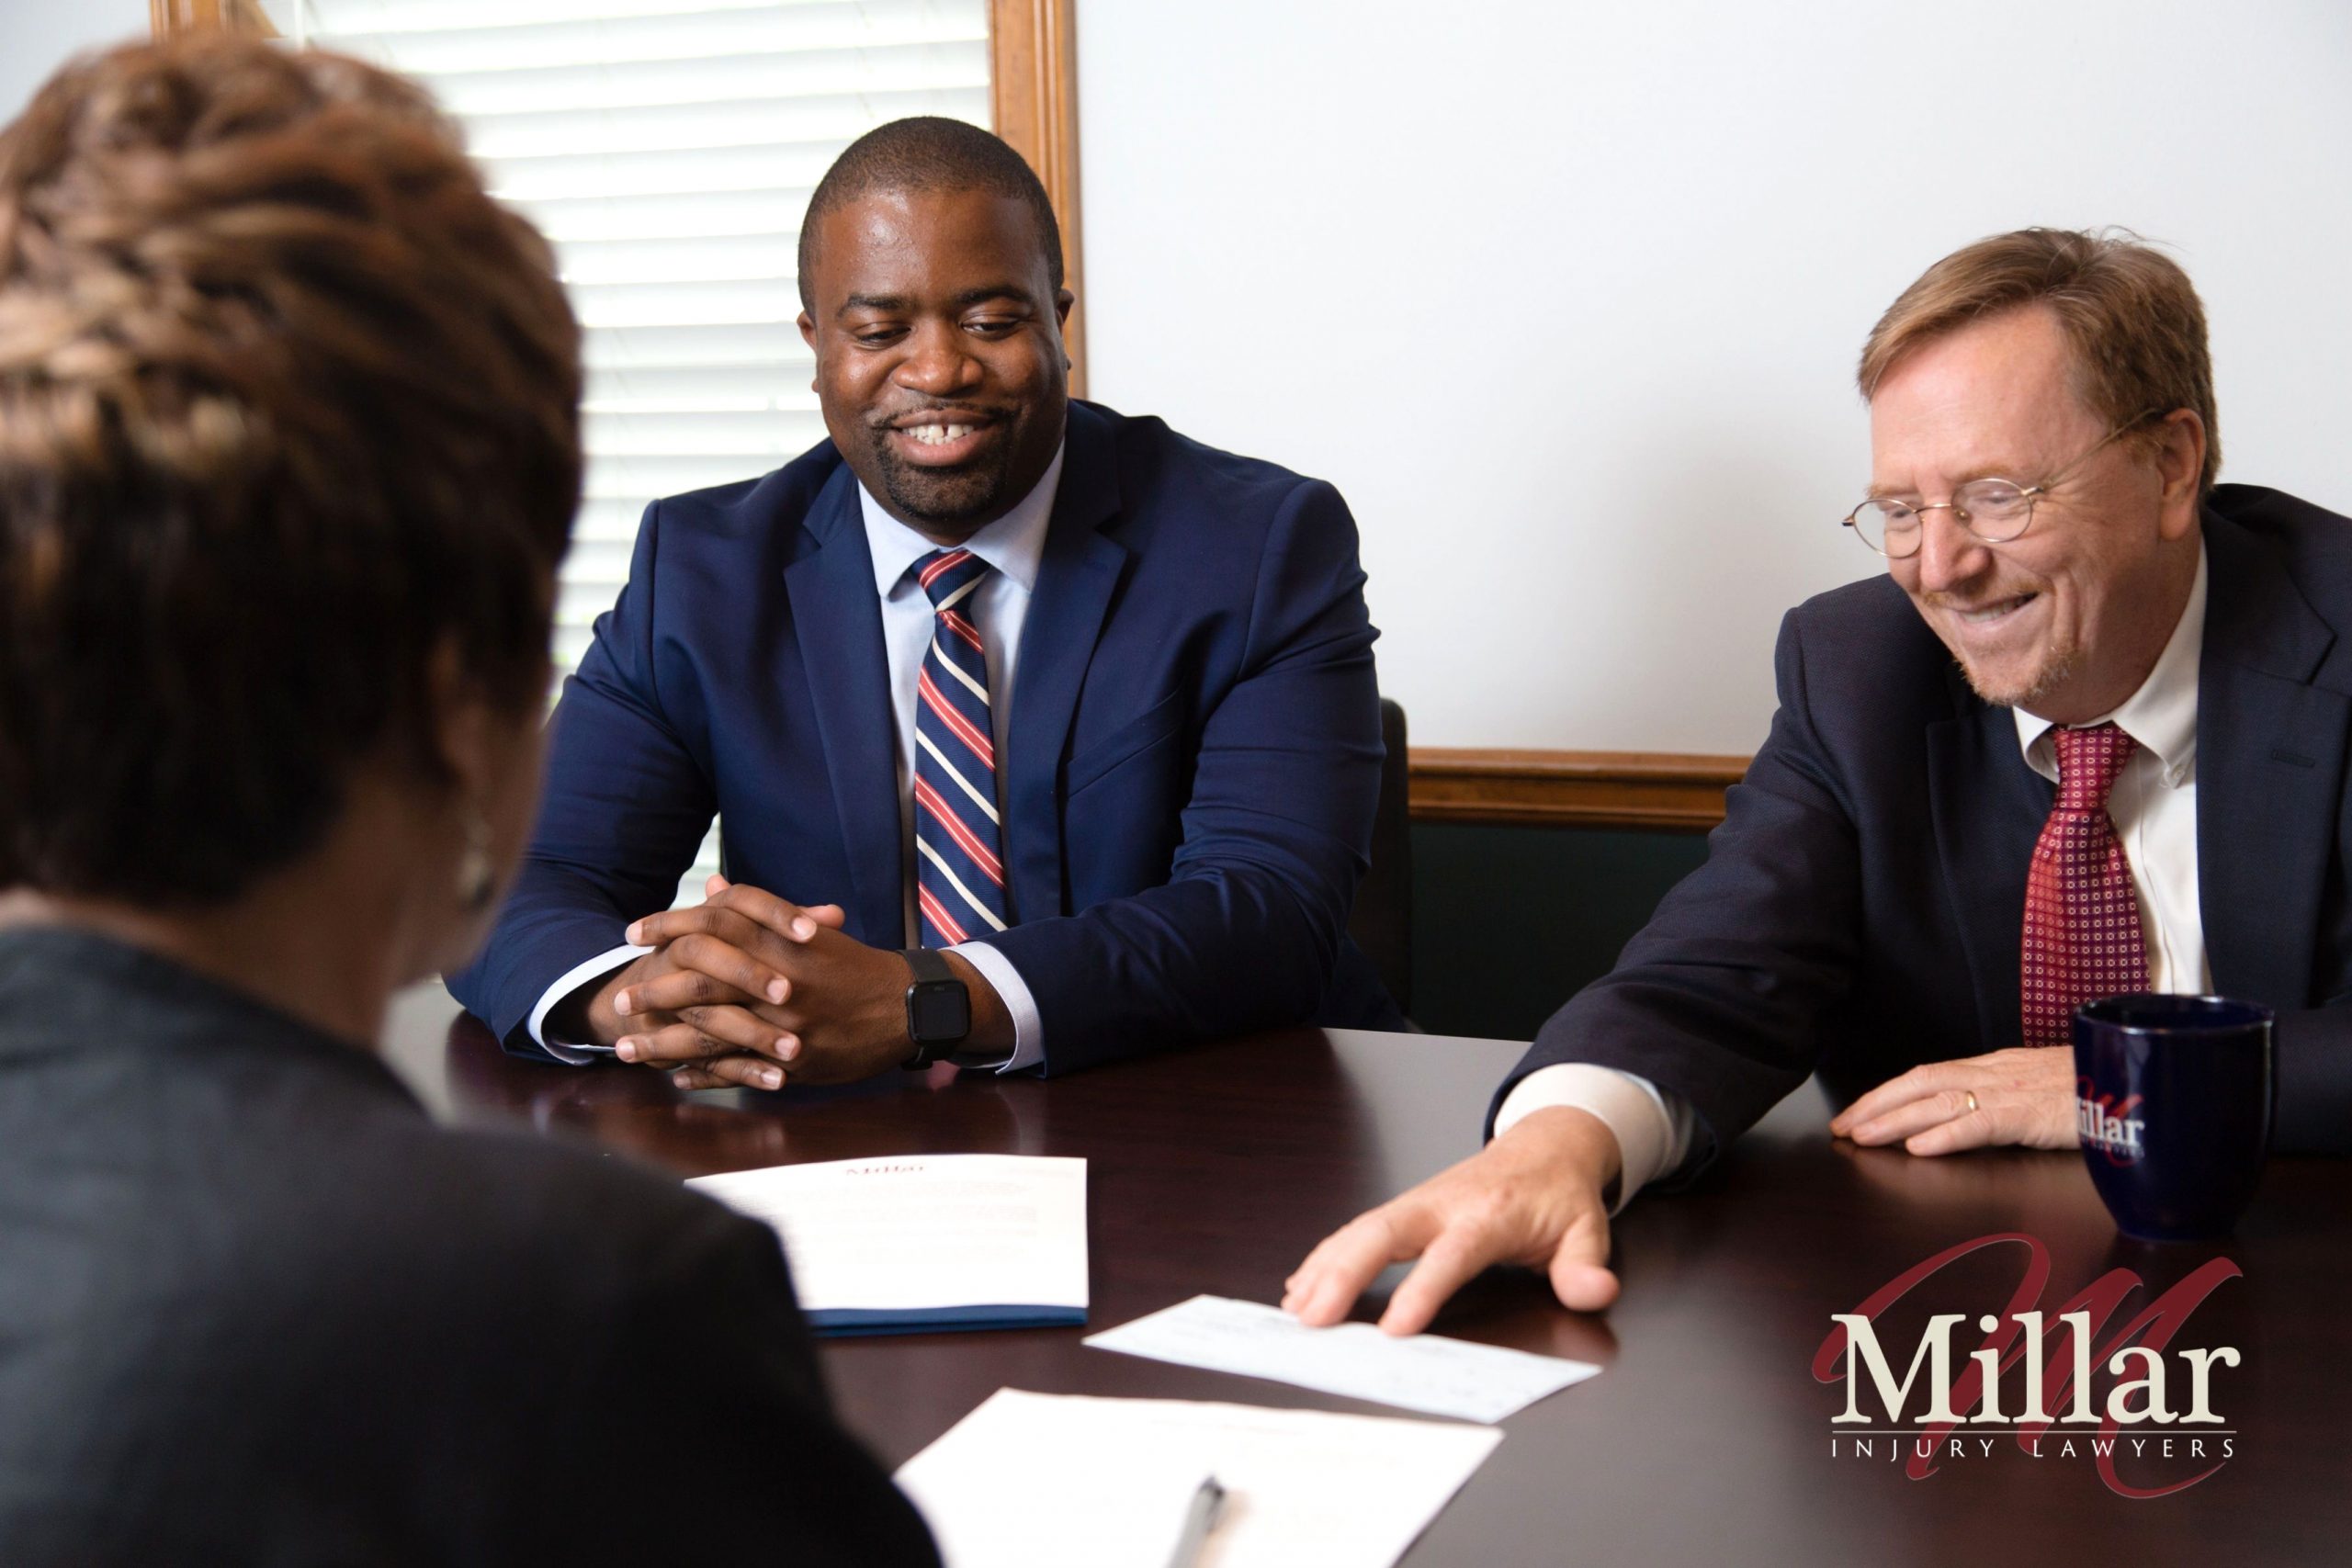 Monroe Ny Car Accident Lawyer Dans atlanta Malpractice attorneys – Insurance – Accident Lawyers and